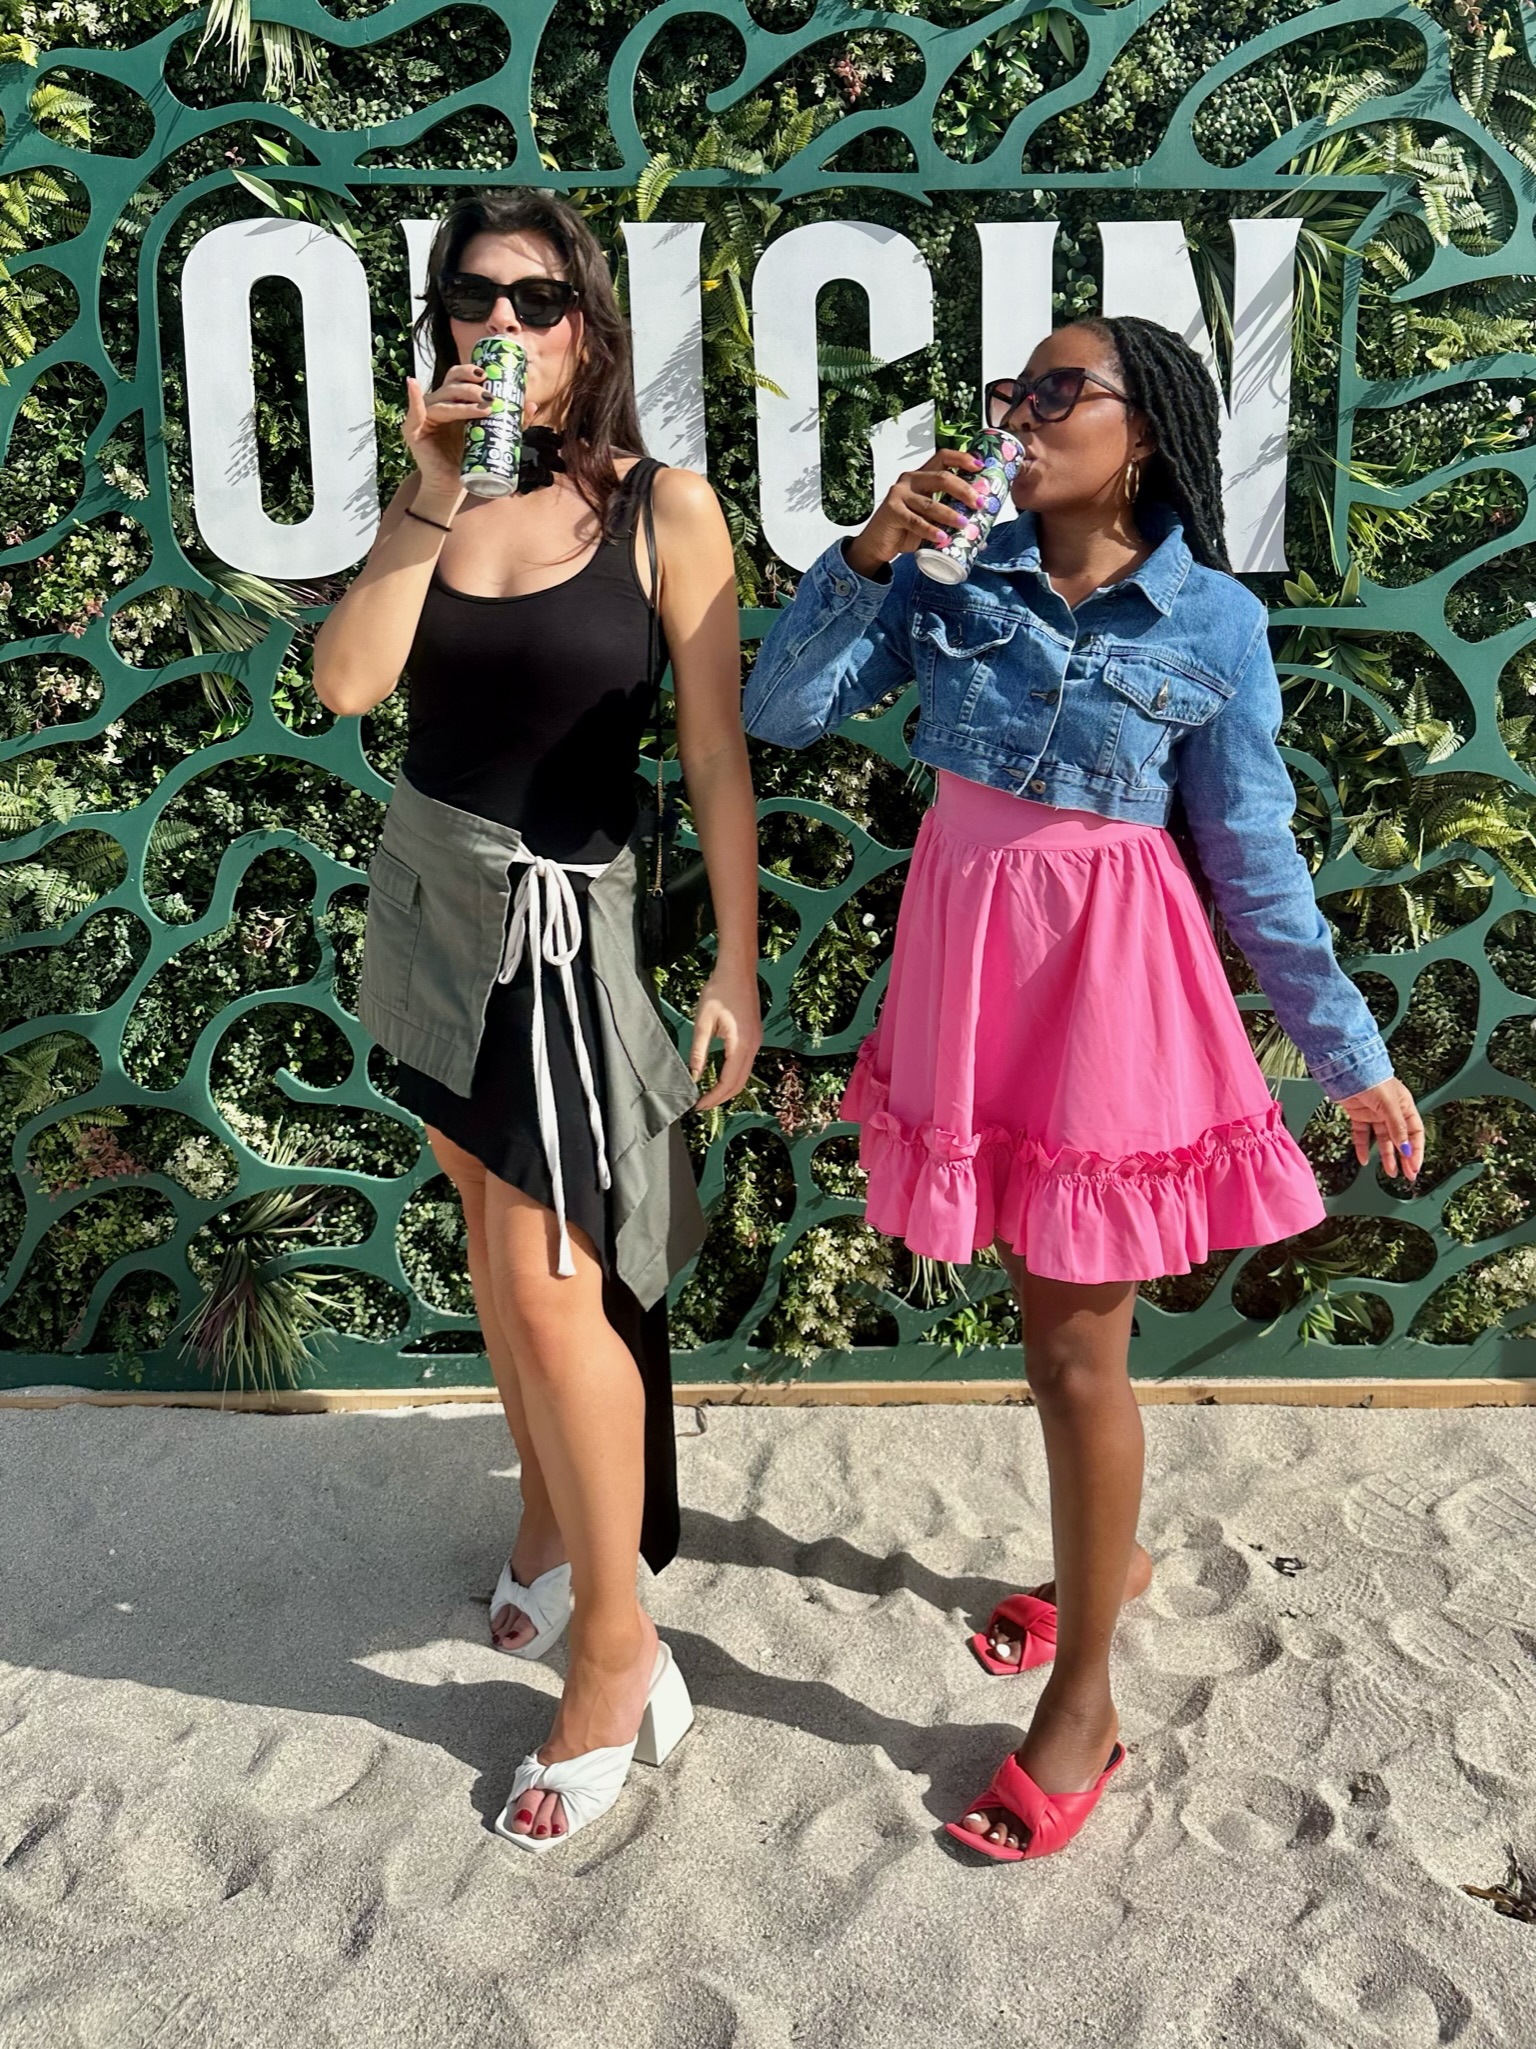 Two friends sipping Origin in front of the Origin mural.